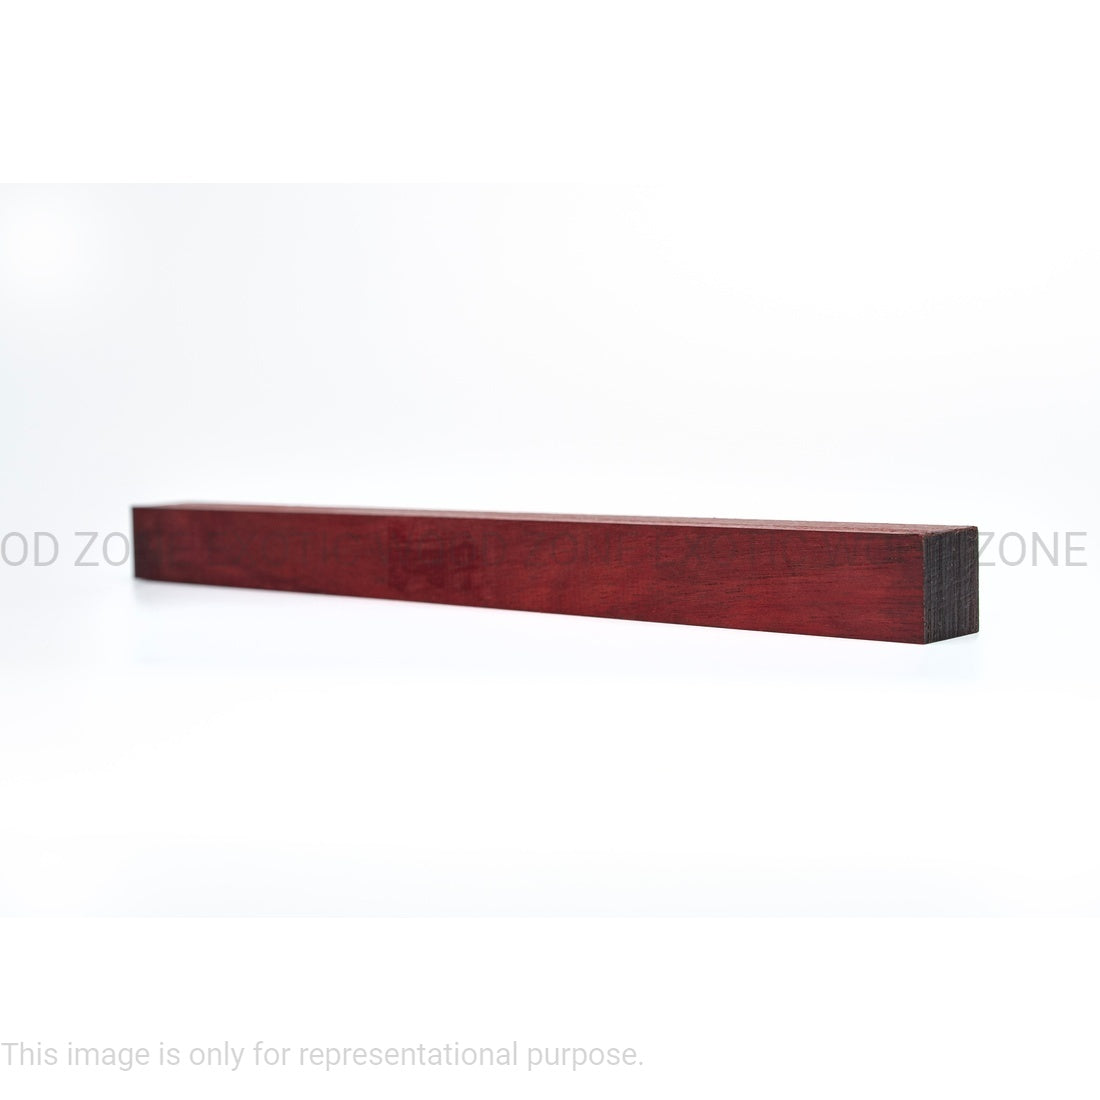 Pack of 5, Bloodwood Hobby Wood/ Turning Blanks 1&quot;x 1&quot;x 12&quot; - Exotic Wood Zone - Buy online Across USA 